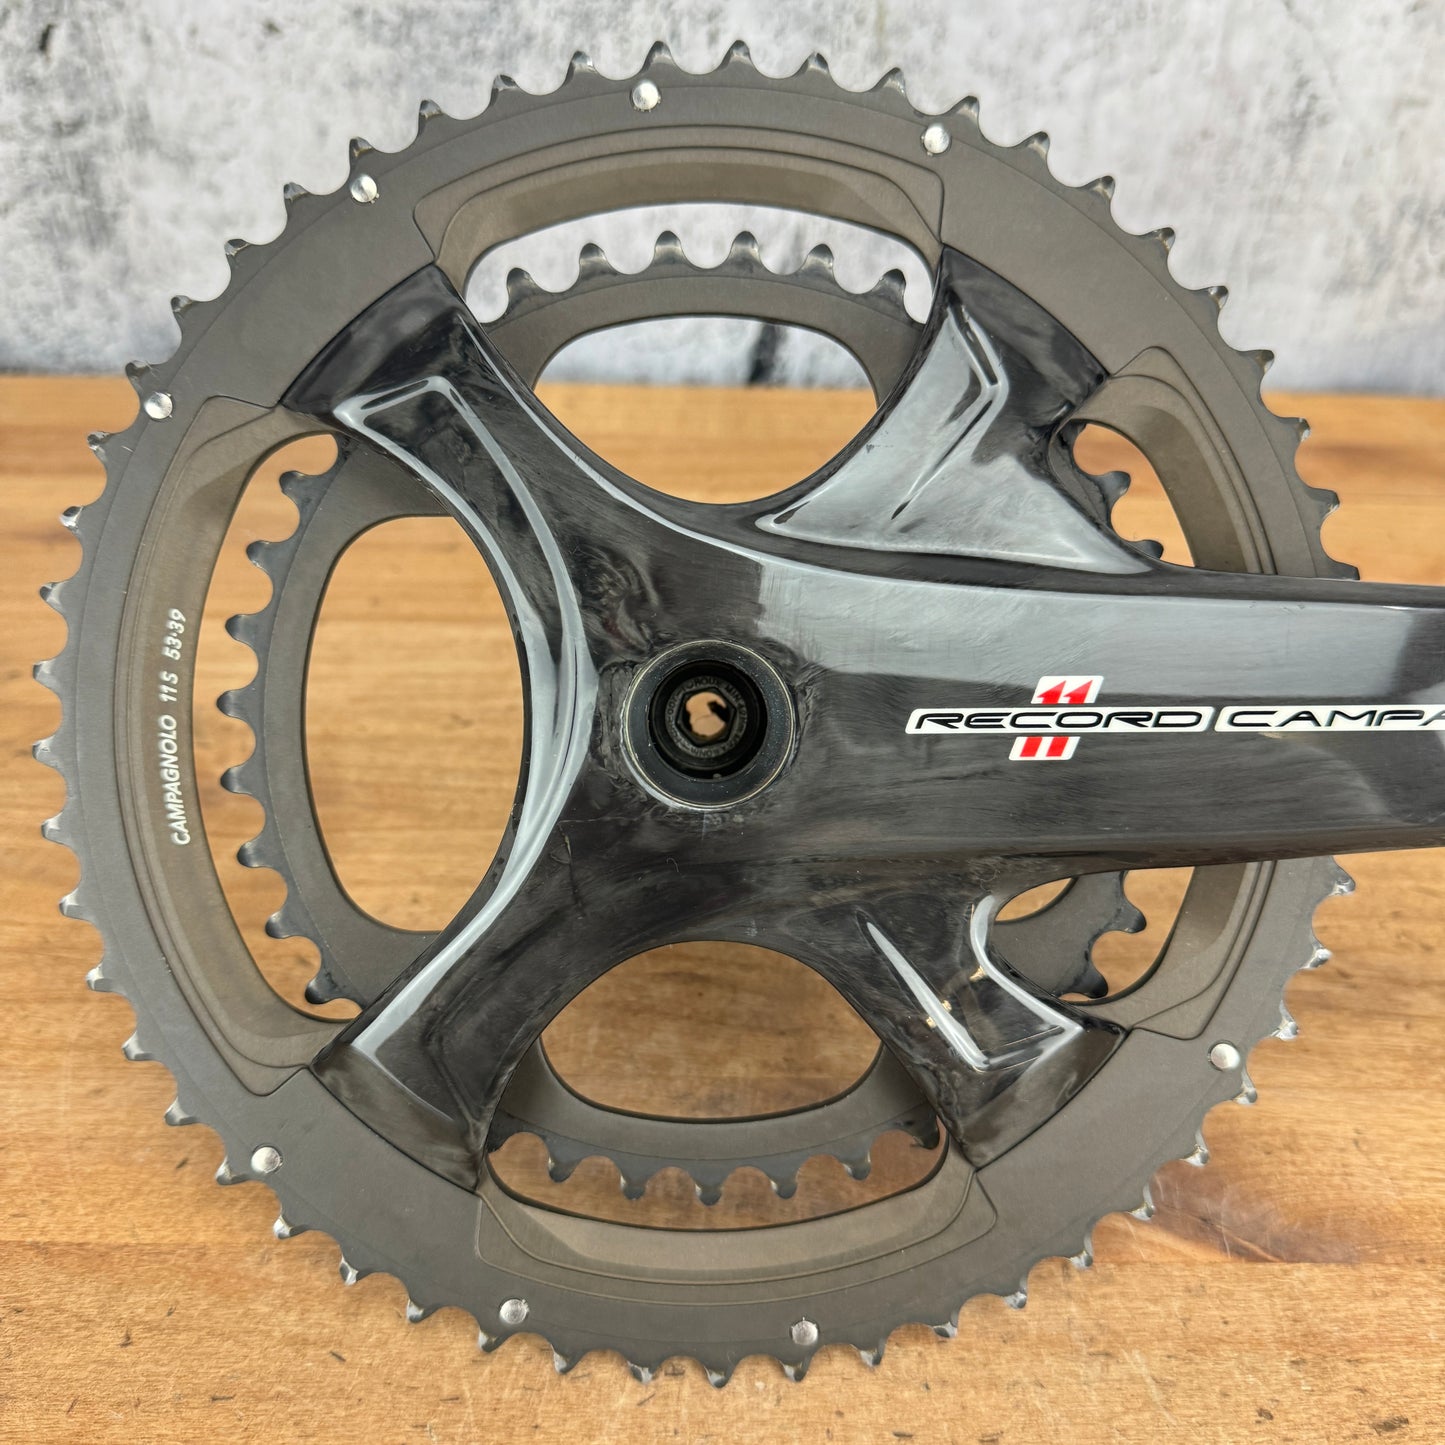 Campagnolo Record 11 175mm 53/39 11-Speed Carbon Bike Crankset 675g